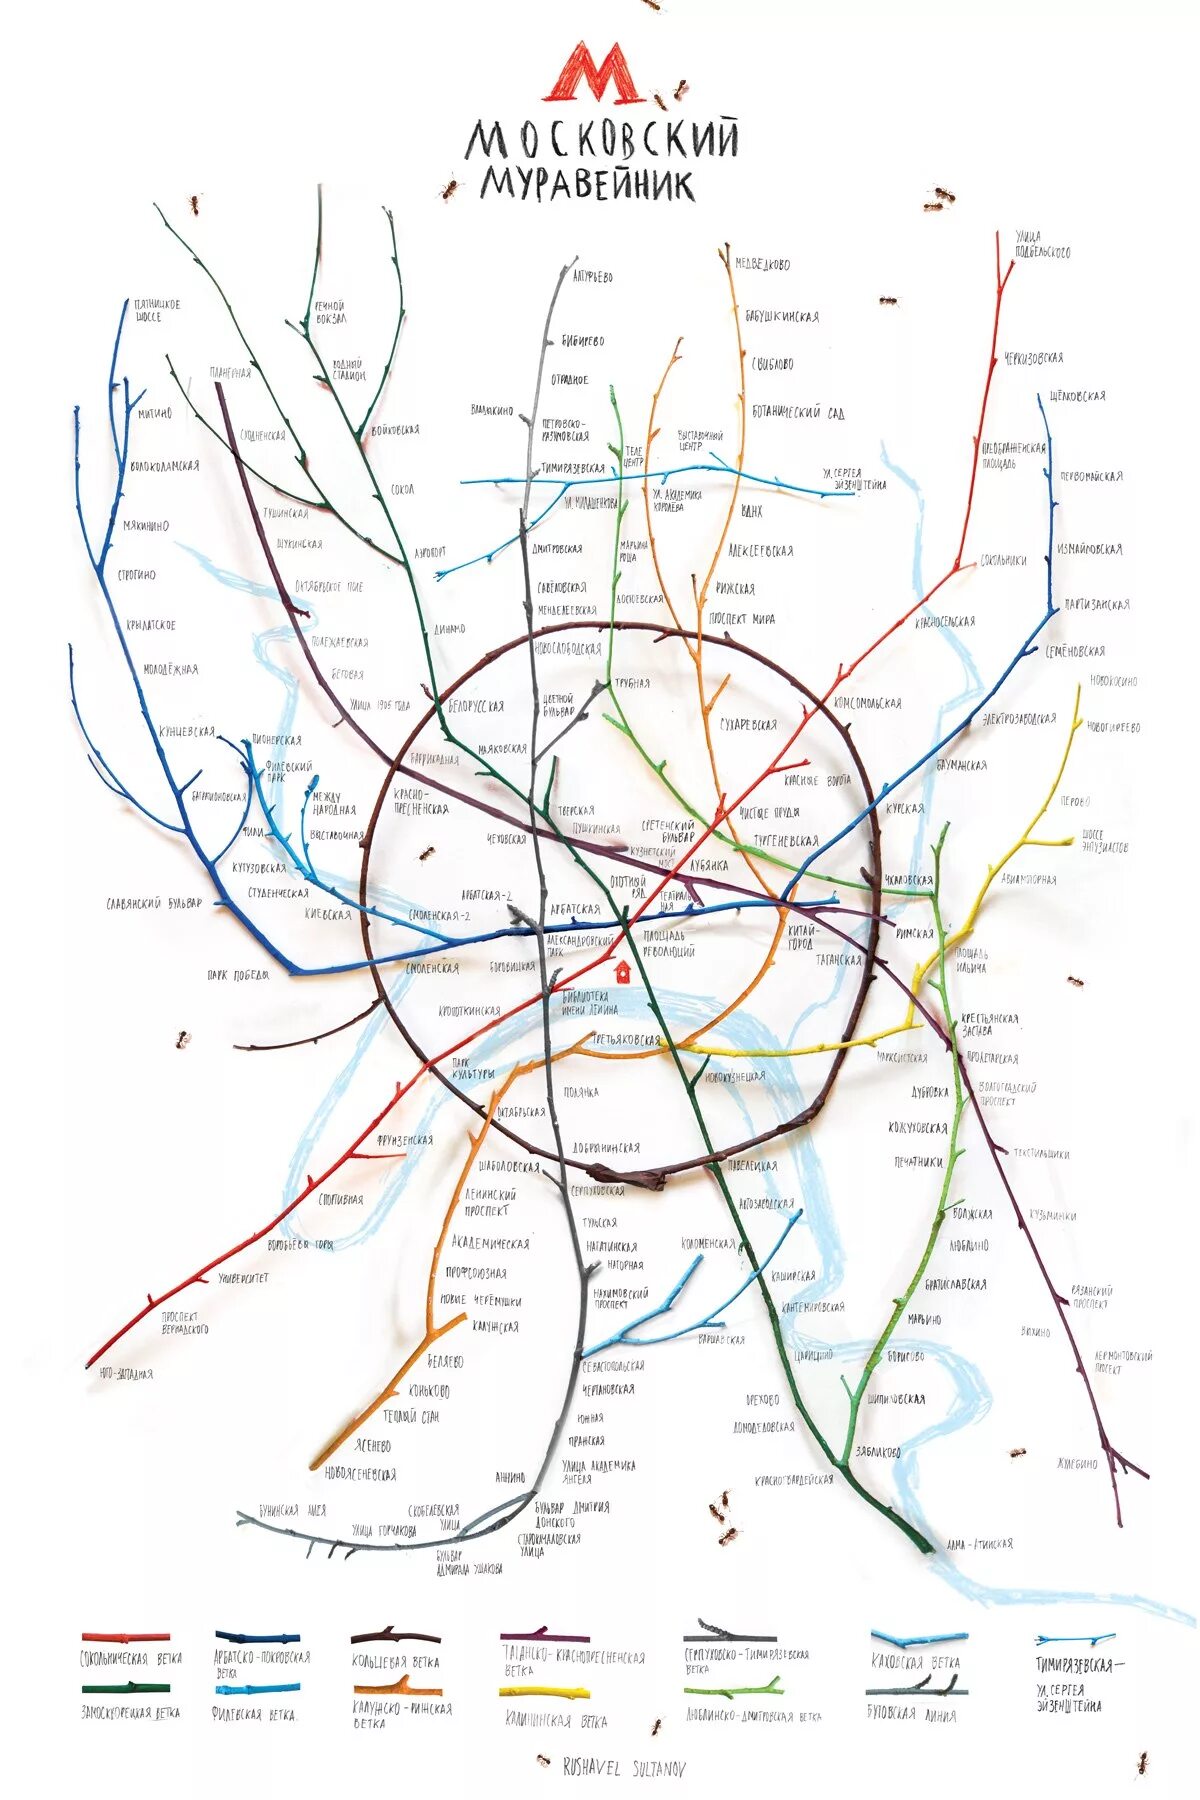 Detailed and fascinating subway map coloring book